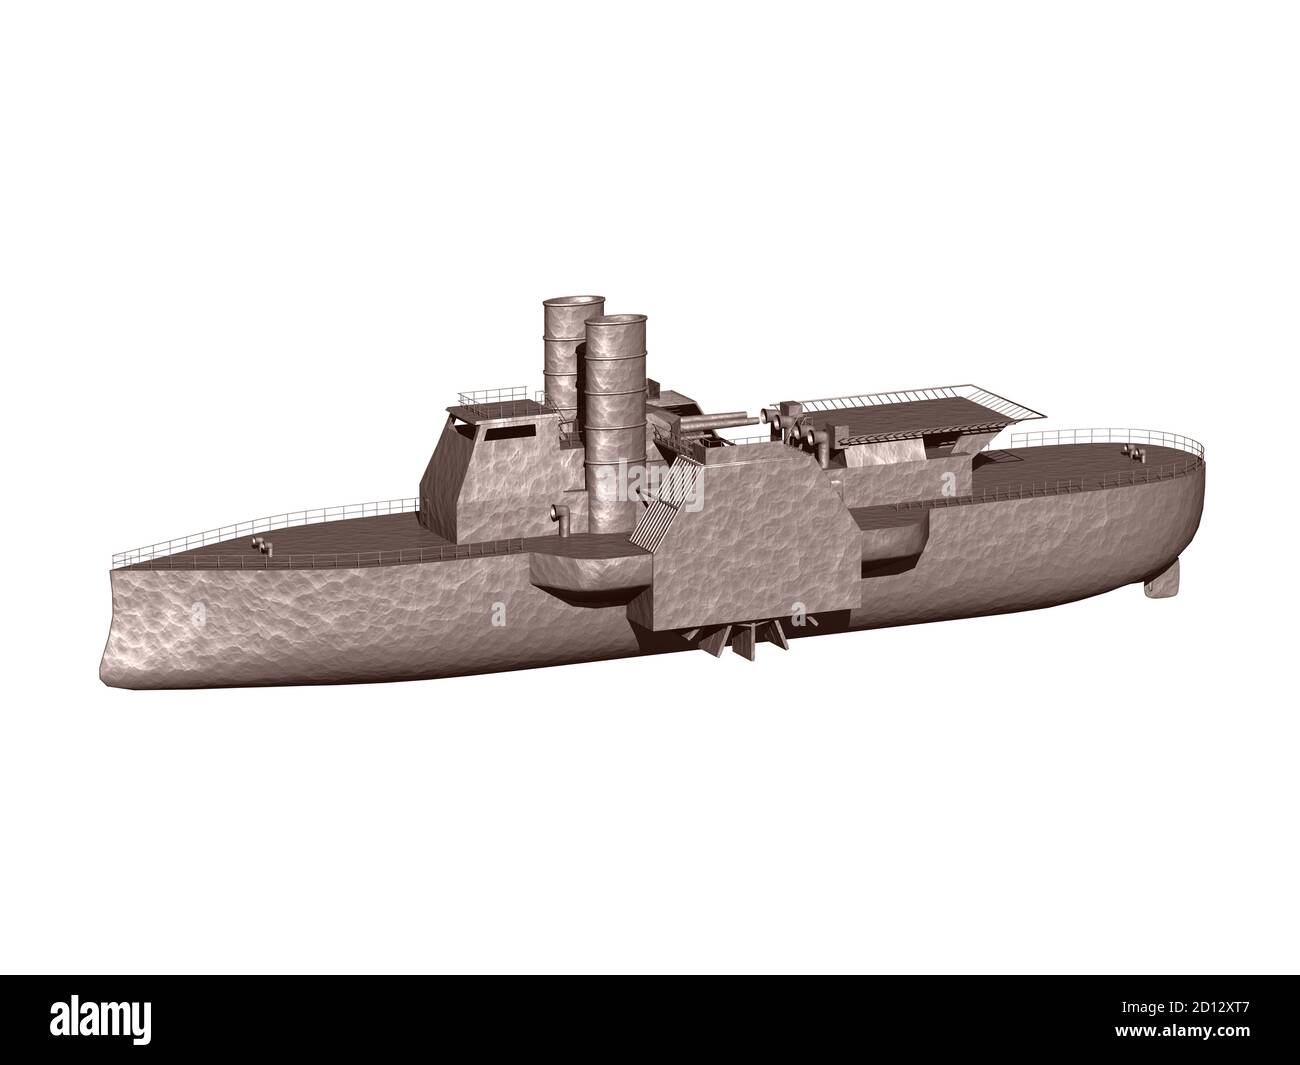 Military ship with armament Stock Photo